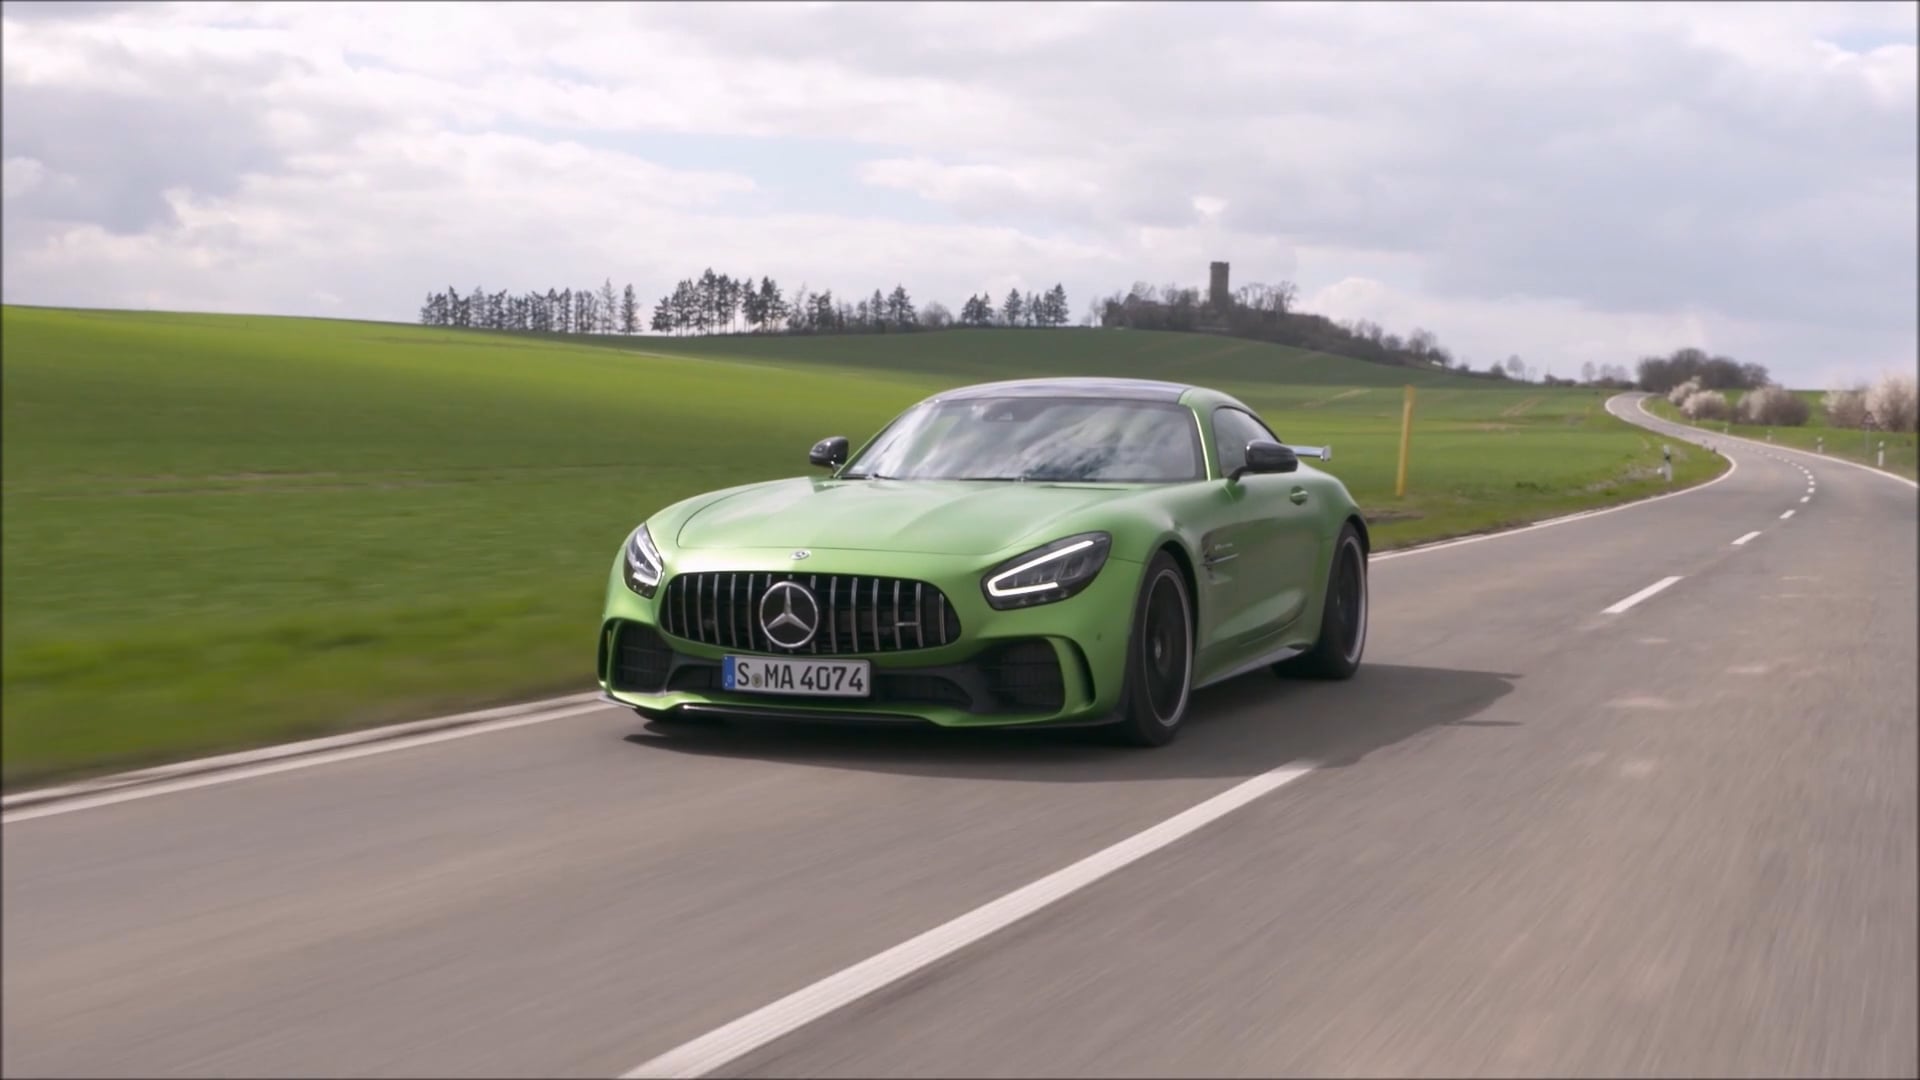 Overview: 2020 Mercedes-AMG GT R